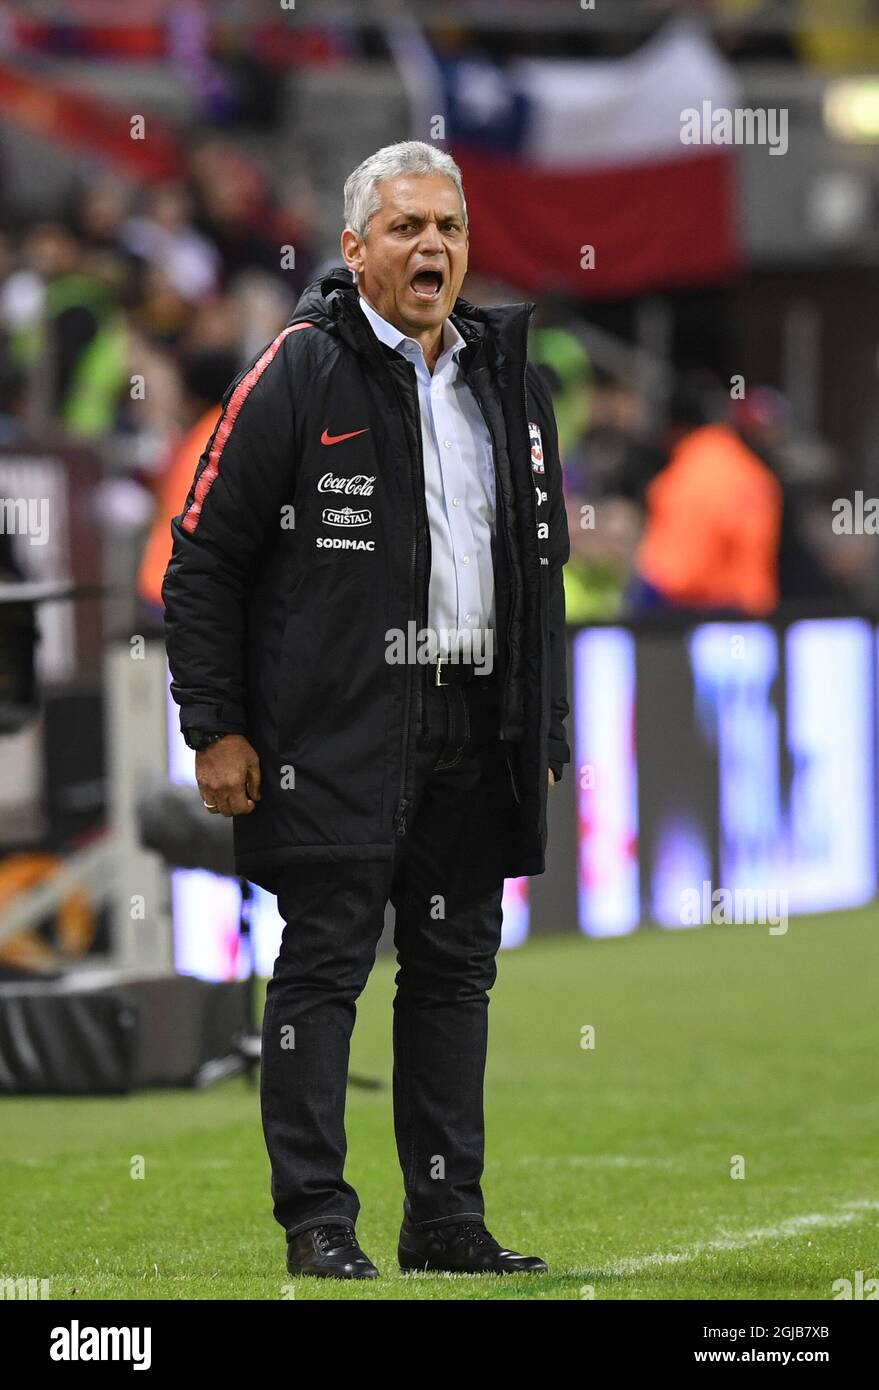 Chile's head coach Reinaldo Rueda rects during the international friendly soccer match between Sweden and Chile at Friends Arena in Solna, Stockholm, on March 24, 2018. Photo: Anders Wiklund / TT / 10040  Stock Photo